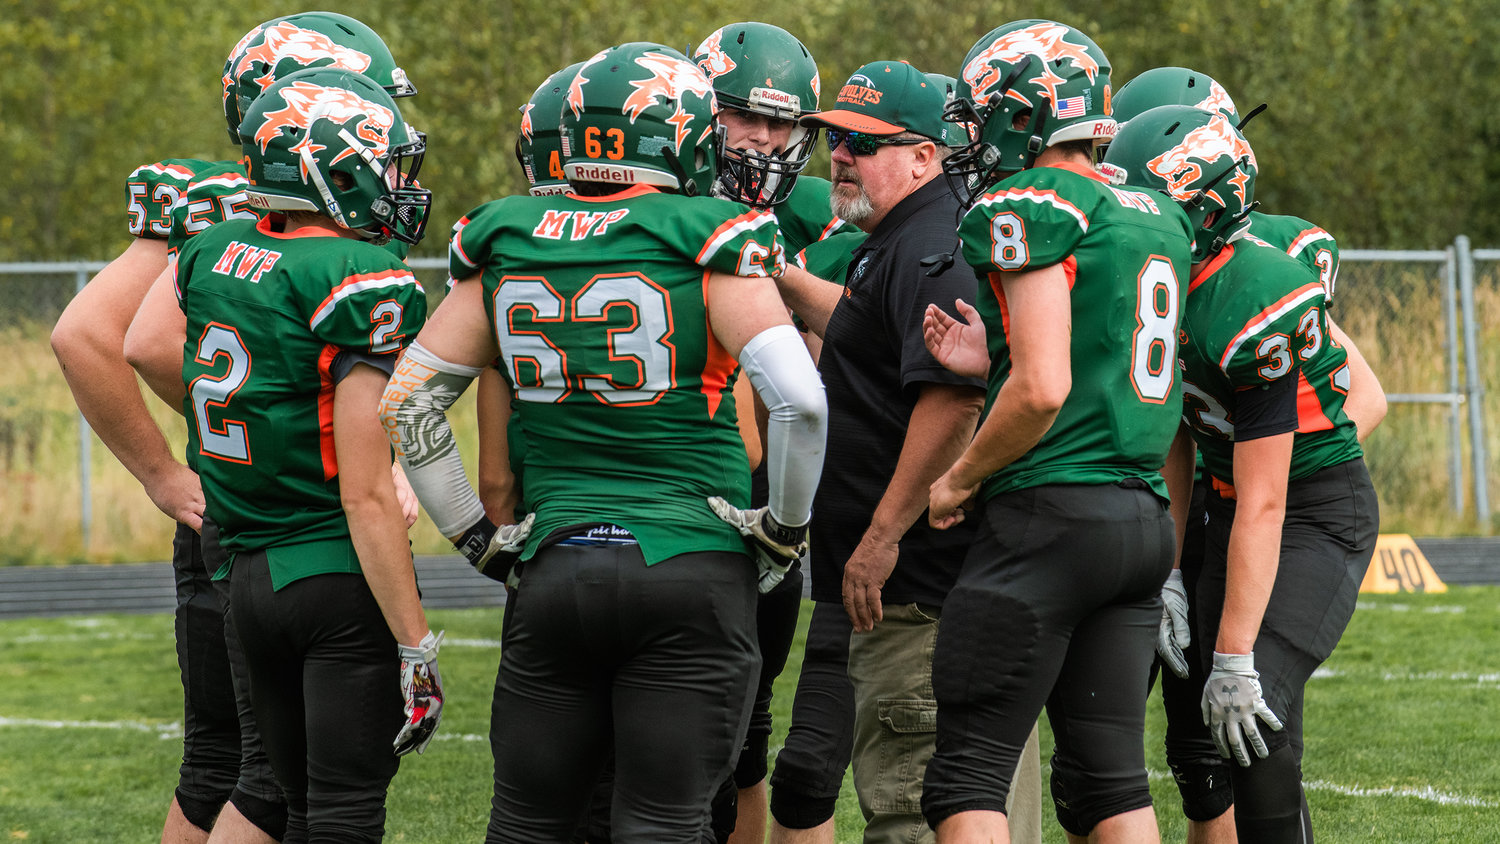 Morton-White Pass Head Coach Lee Metcalf talks to players in a huddle during a game Saturday afternoon in Morton.